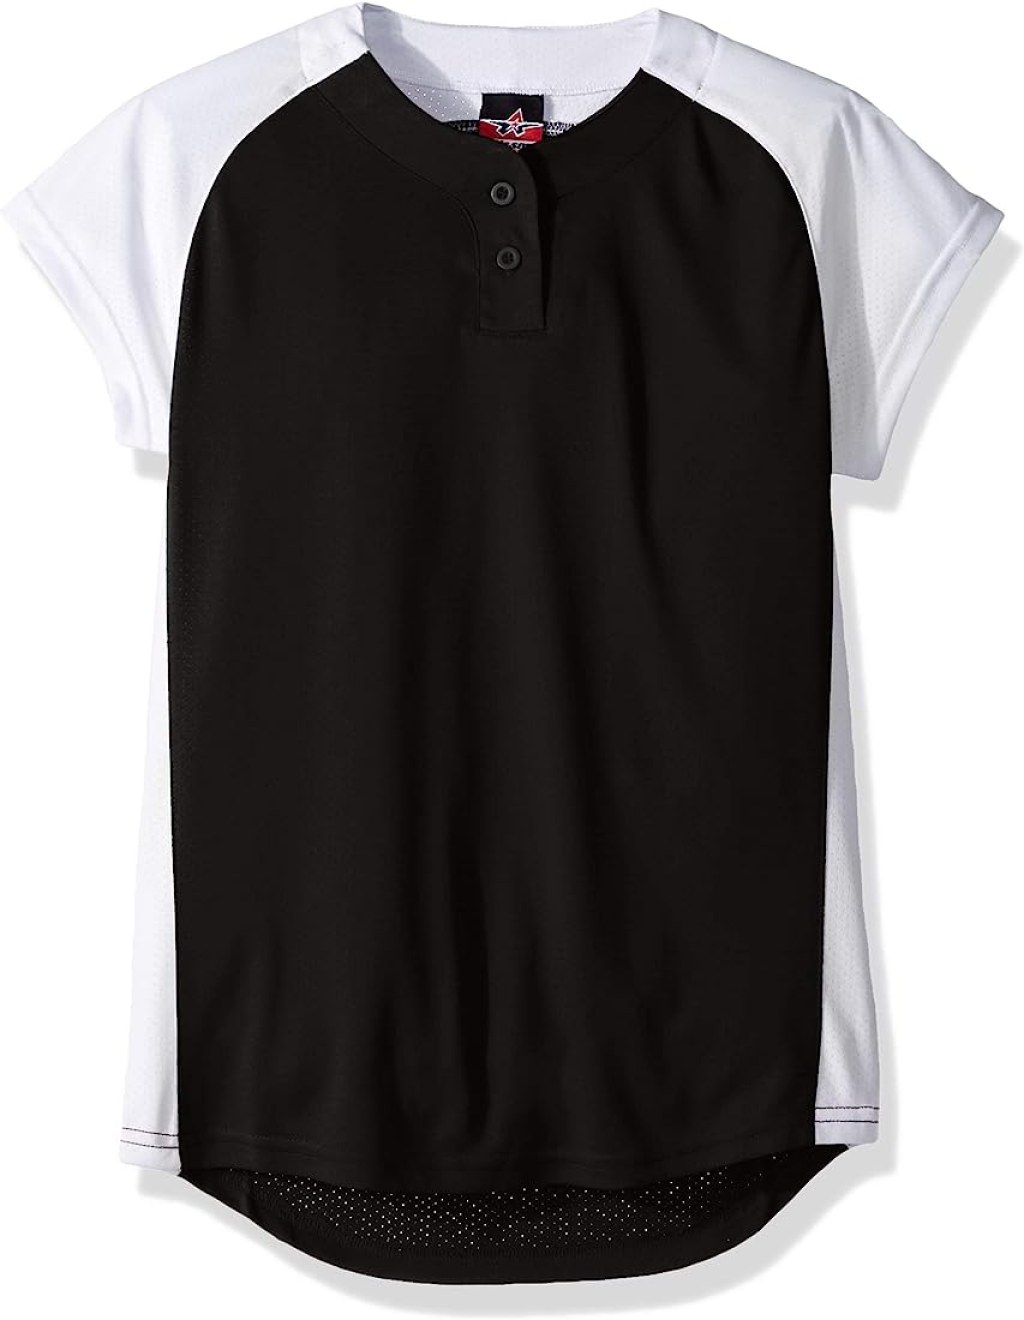 Picture of: Alleson Ahtletic Girls Dura-Light Fast Pitch Softball Jersey, Black